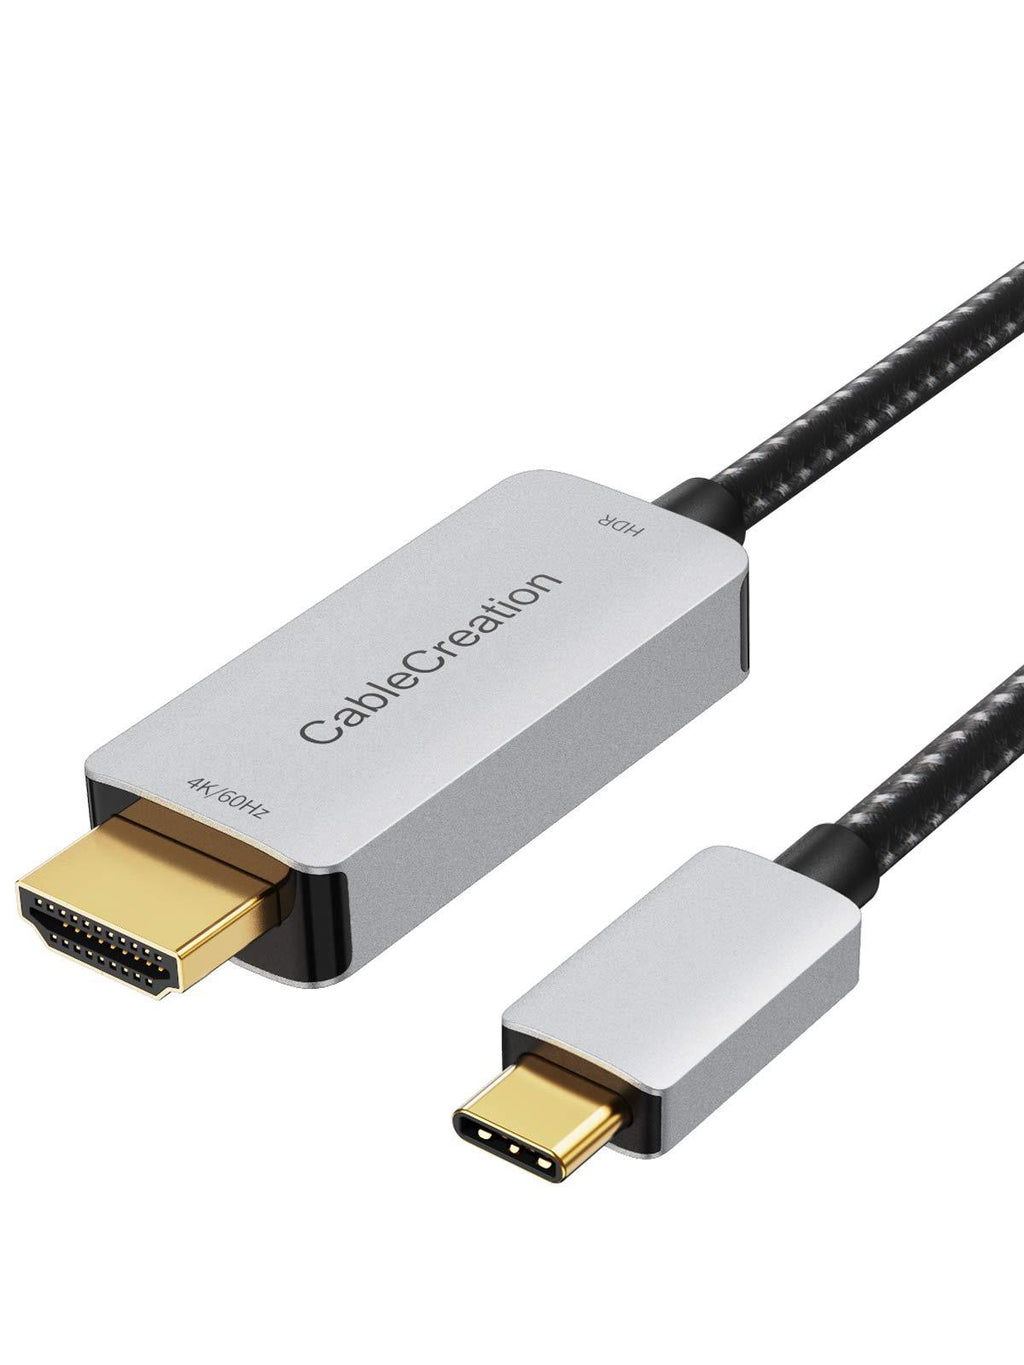 USB C to HDMI Cable 3FT HDR 4K@60Hz, 2K@144Hz, 2K@120Hz, CableCreation USB Type C to HDMI Adapter Thunderbolt 3 Compatible for MacBook Pro/Air, iMac, iPad Pro 2020, Galaxy S20 S10/Note 10 and More 3.3FT